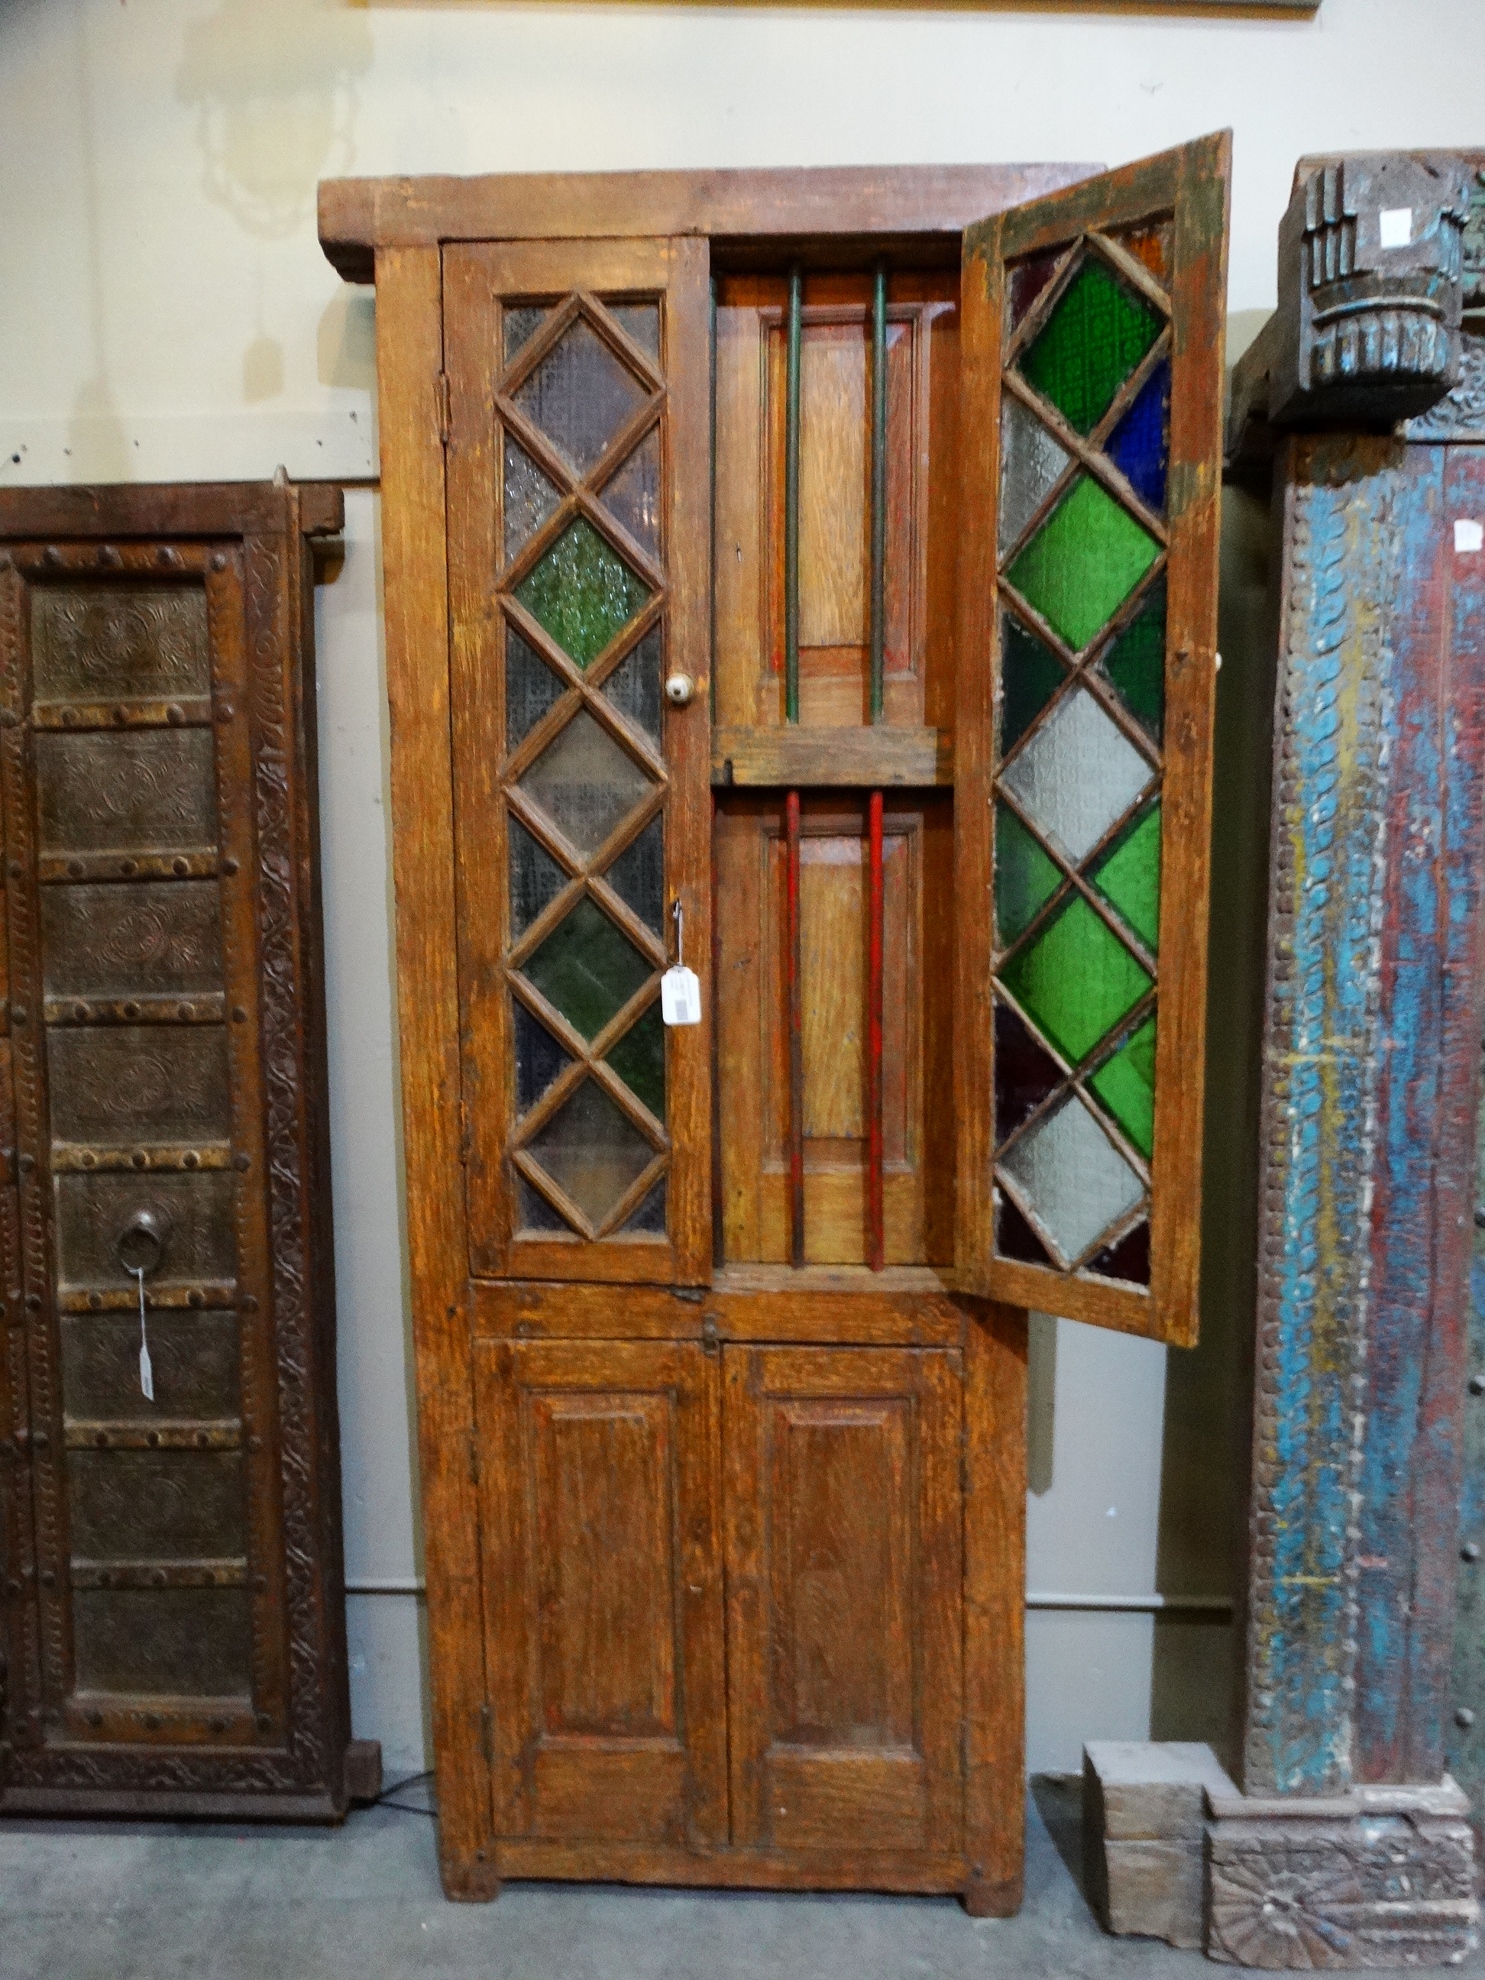 Architectural Salvage Antique Doors with Colored Glass Windows Furniture Stores Denver